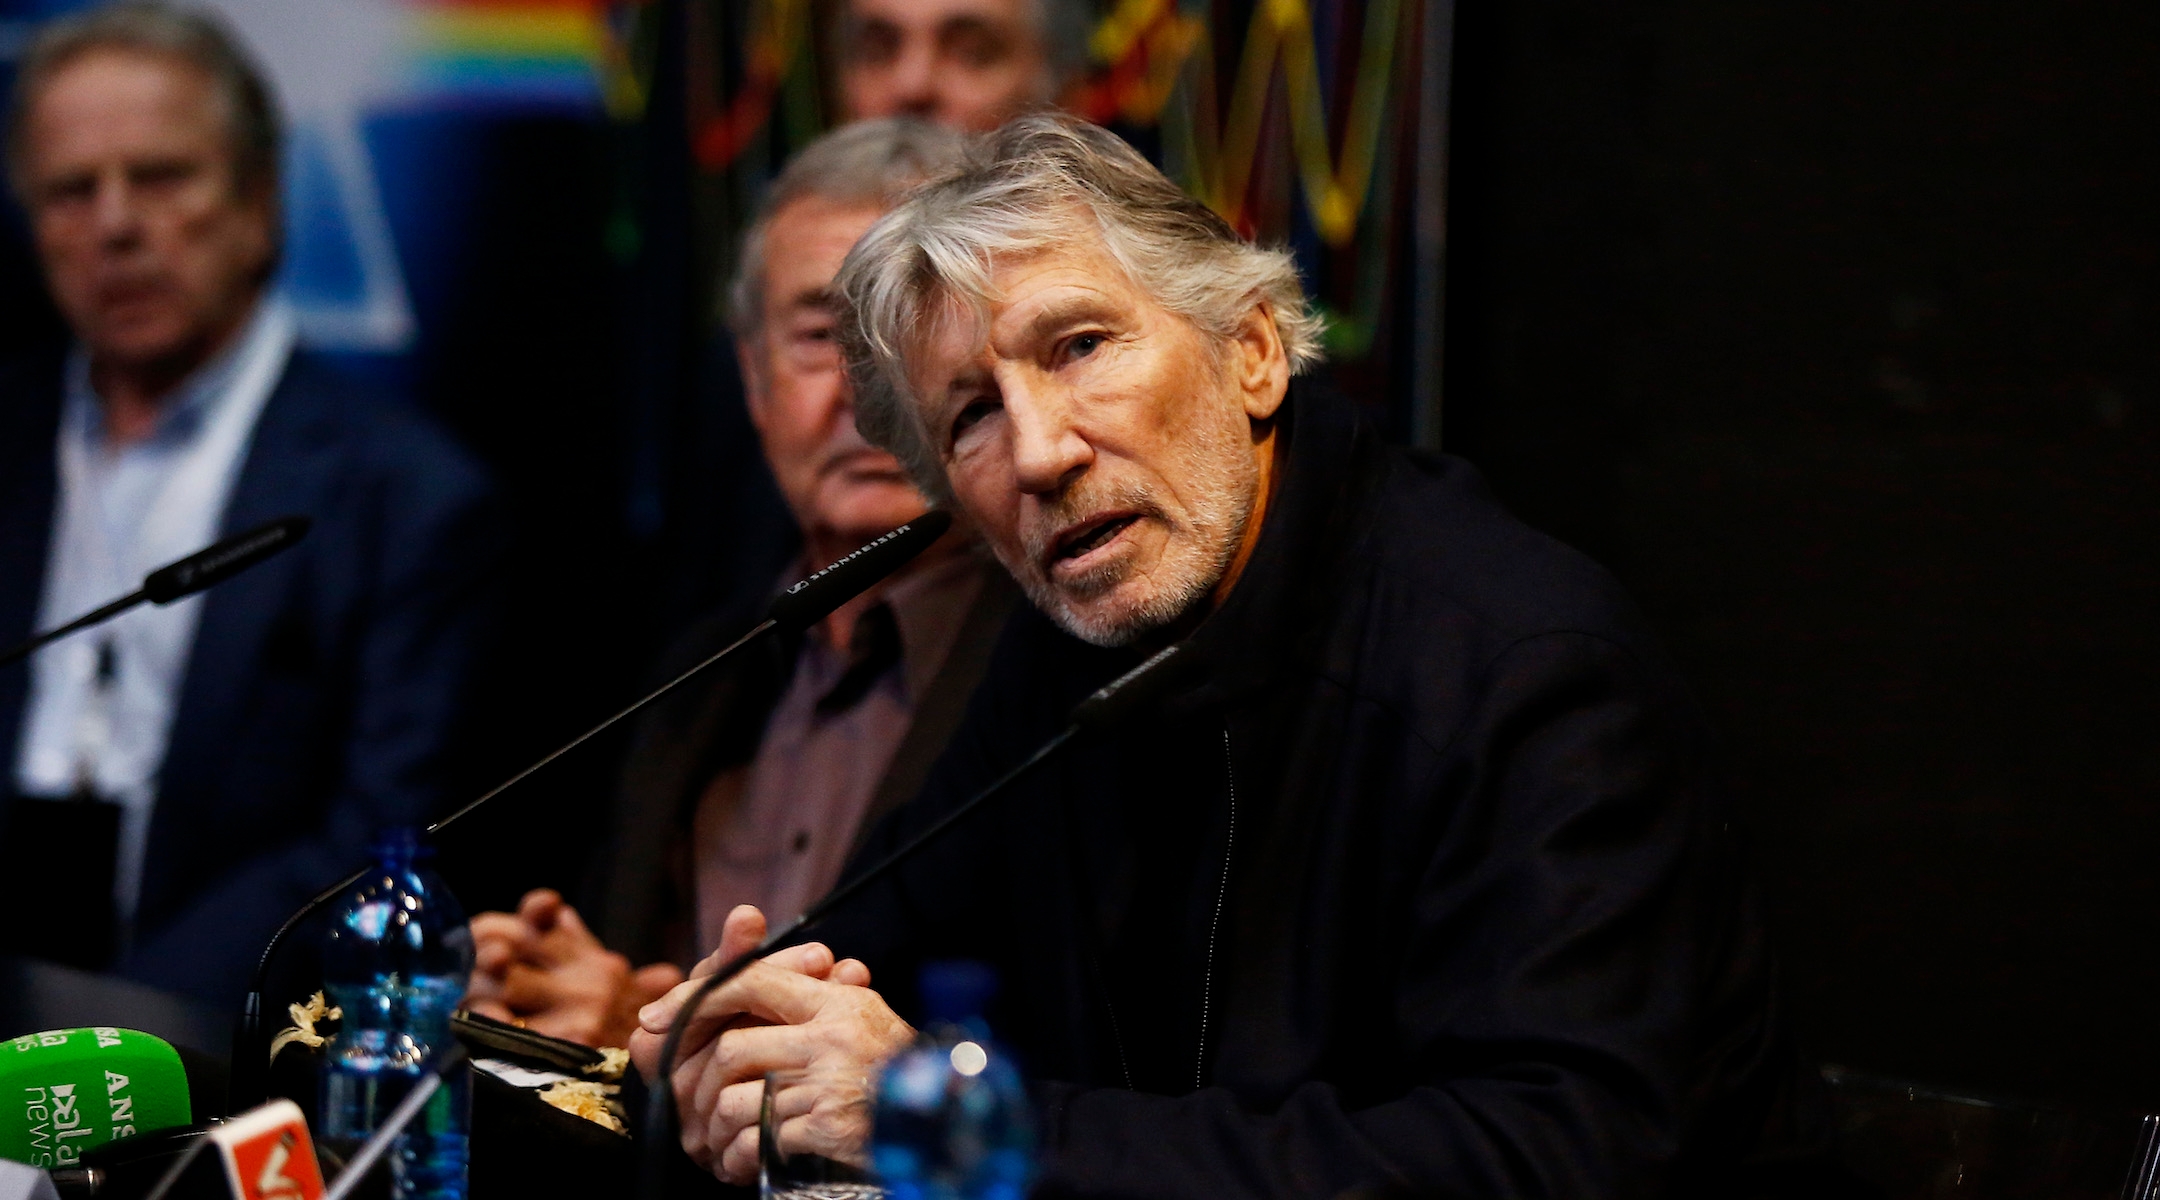 Roger Waters at a news conference in Rome, Jan. 16, 2018. He is a leading celebrity in the Boycott, Divestment and Sanctions movement against Israel. (Ernesto S. Ruscio/Getty Images)